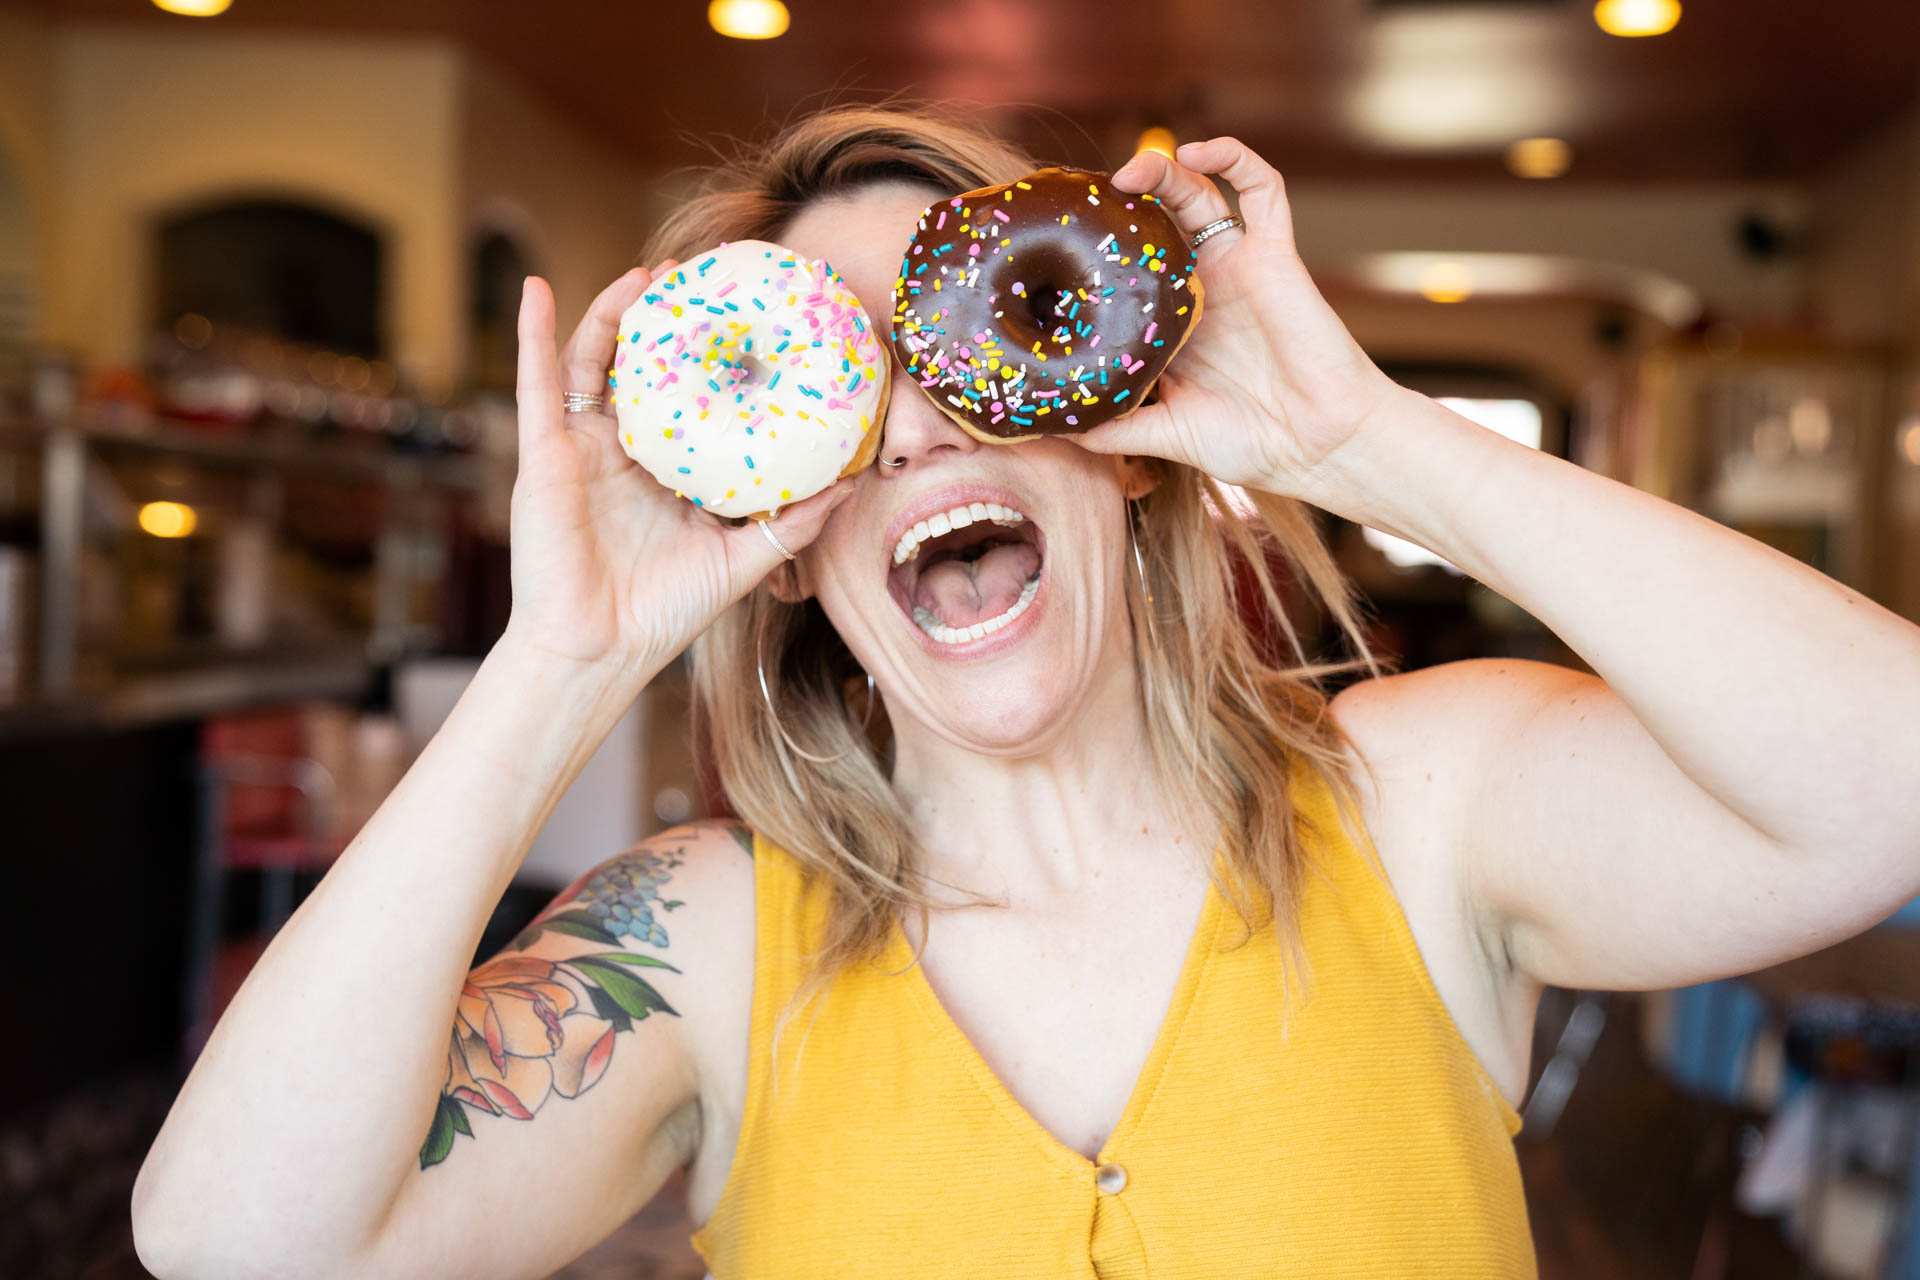 Jessica Strobel holding multi-colored doughnuts over her eyes, smiling wide